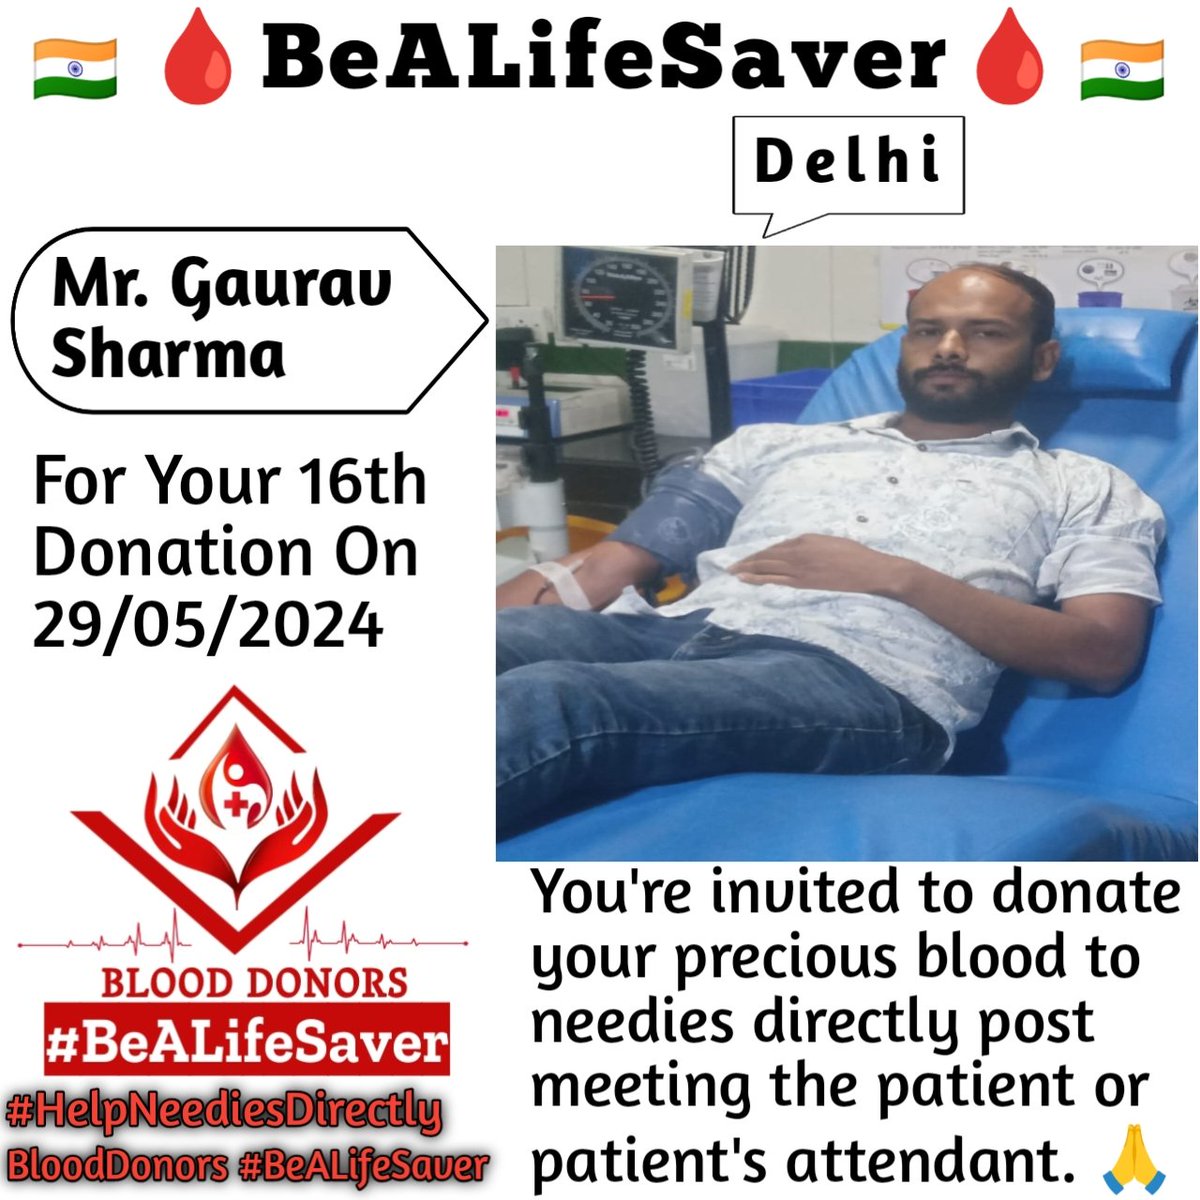 🙏 Congrats To Mr. Gaurav Sharma Ji For His 16th Blood Donation 🙏 #HelpNeediesDirectly #BeALifeSaver Today's hero, Mr. Gaurav Sharma Ji, donated blood in Delhi for the 16th time to help a patient in need. Heartfelt gratitude and respect for his selfless act.